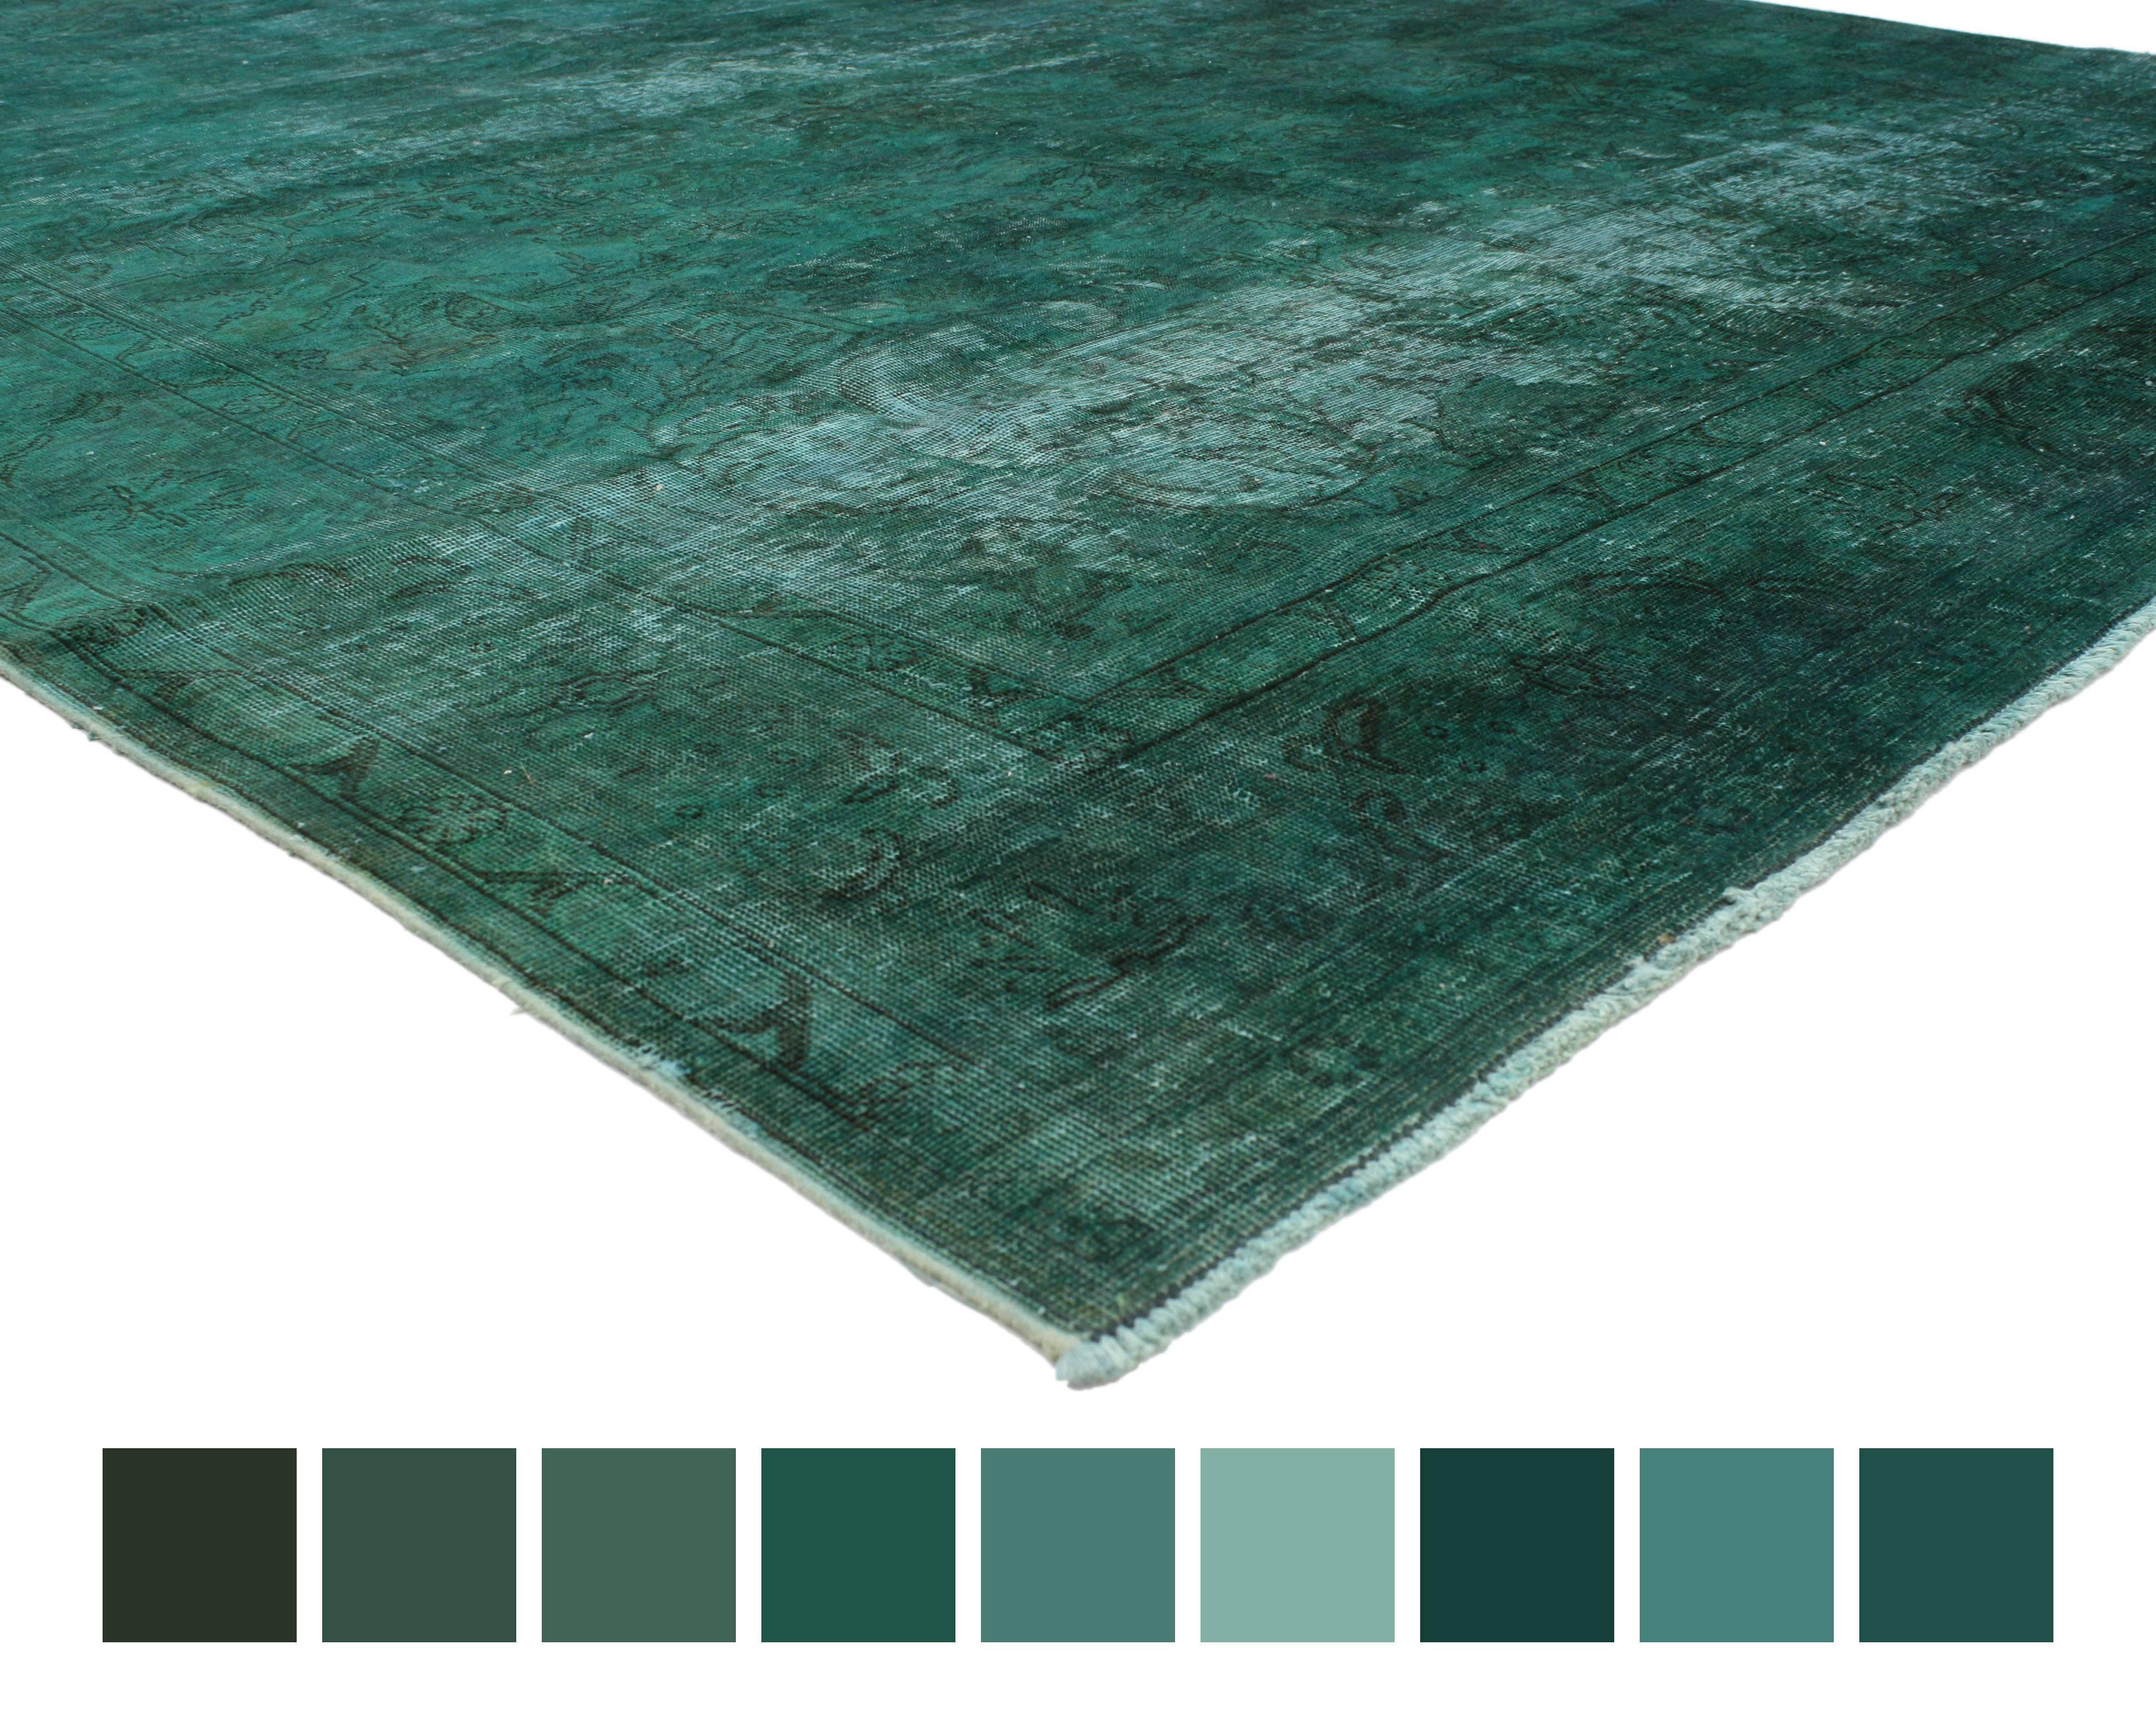 80417 Distressed Vintage Overdyed Teal Persian Rug with Modern Style. This beautifully composed distressed overdyed teal Persian rug with modern contemporary style features an all-over geometric pattern. Distressed and overdyed hues of worn